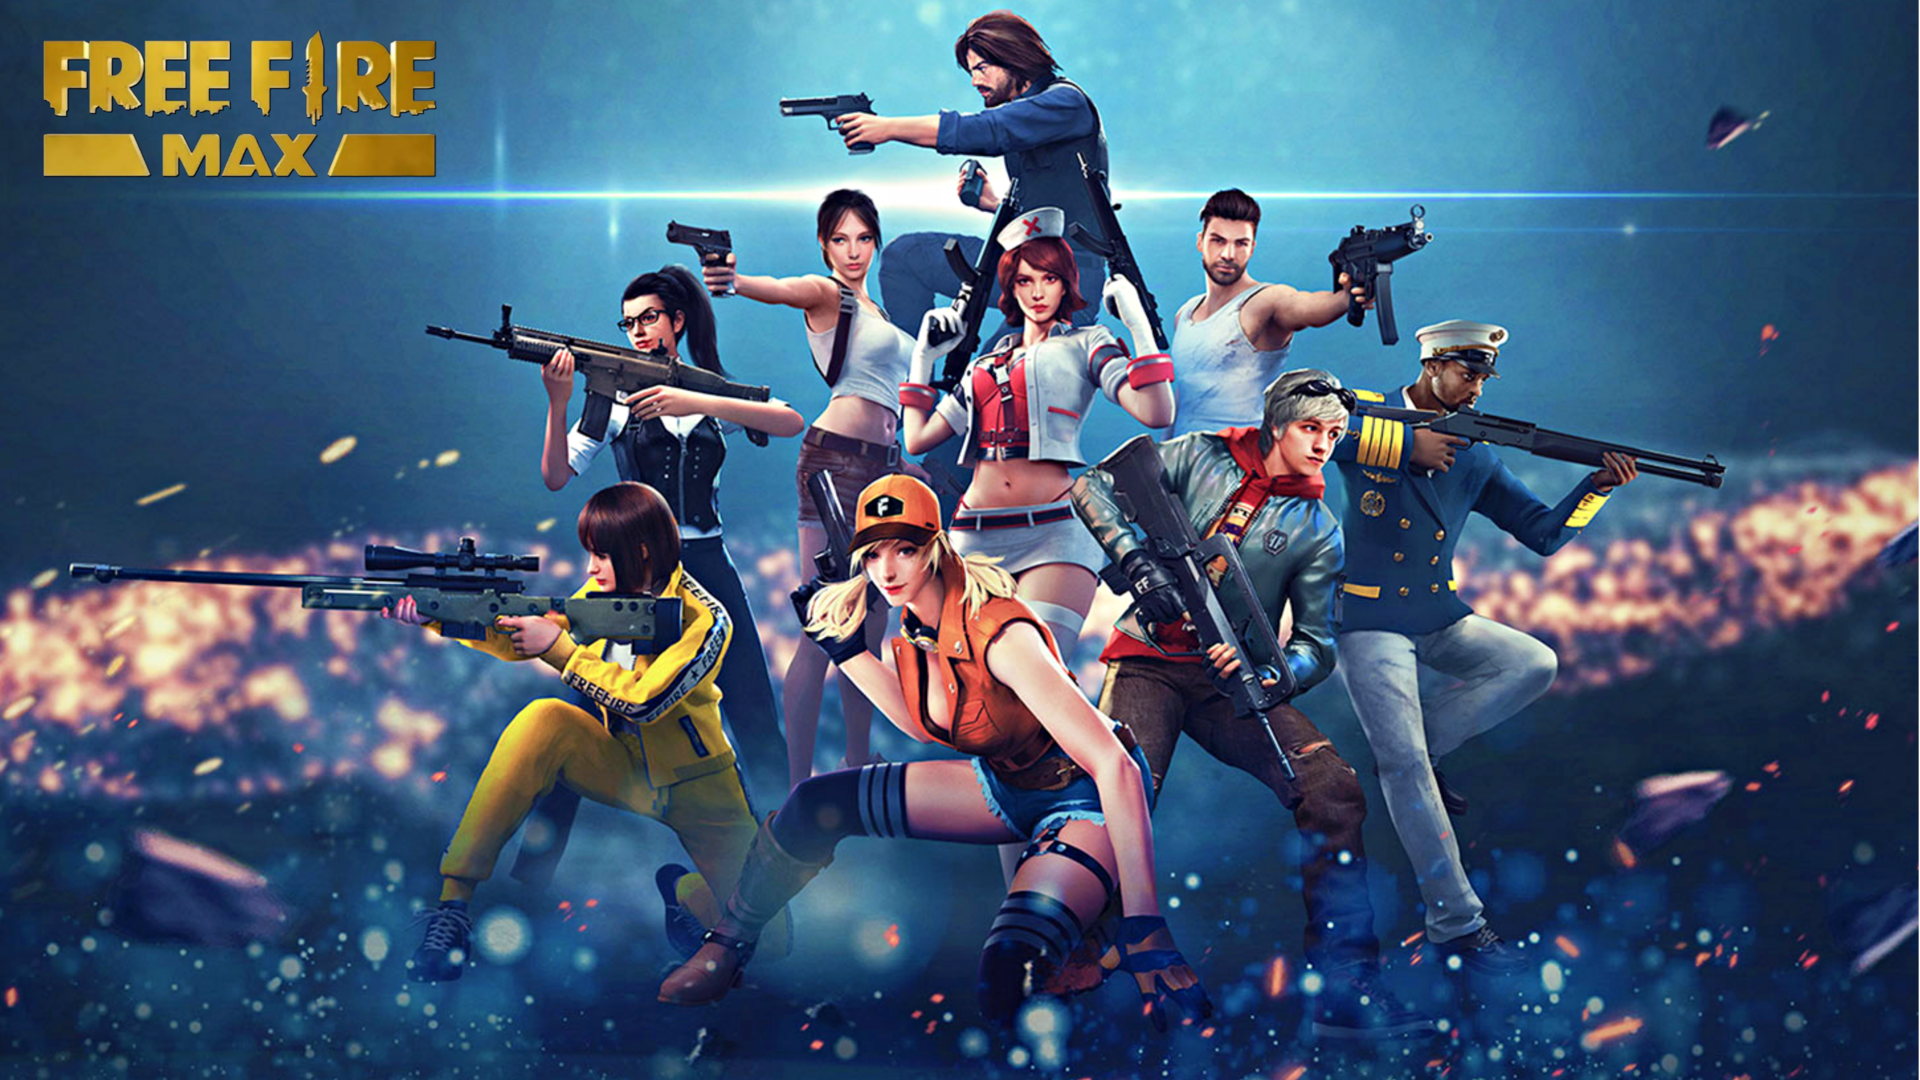 How to redeem Free Fire MAX codes for April 8